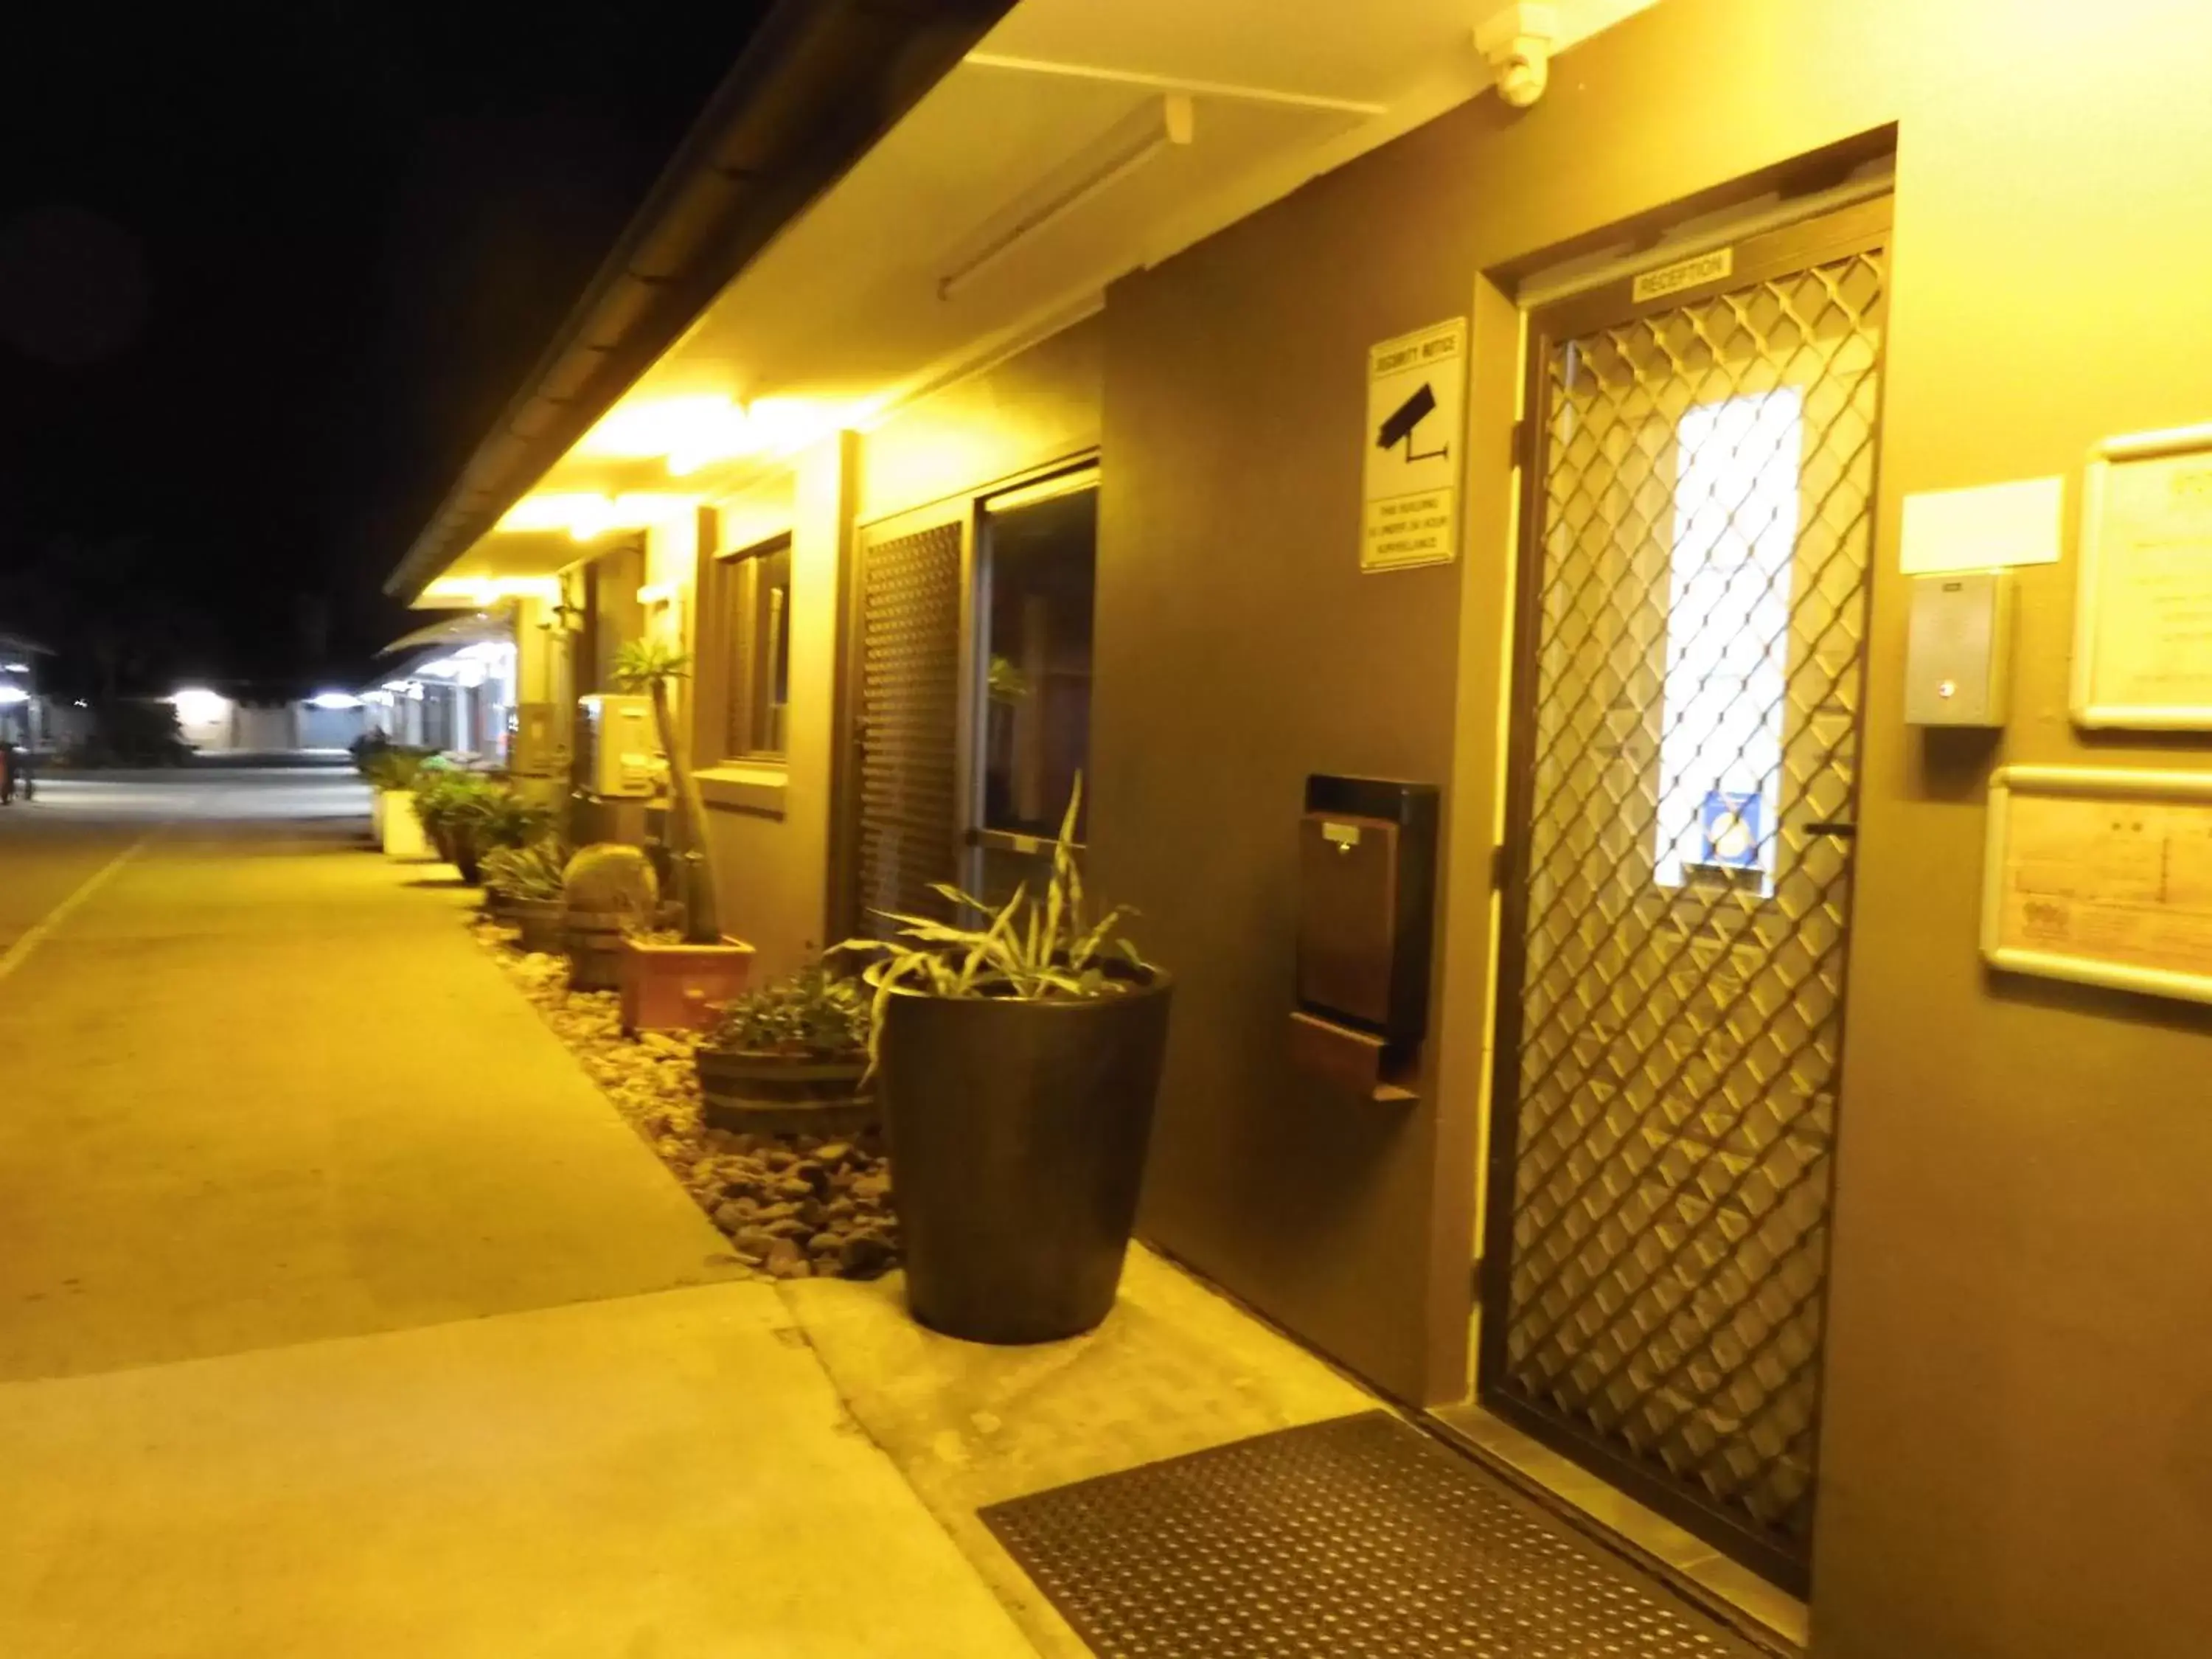 Property building in Dalby Parkview Motel